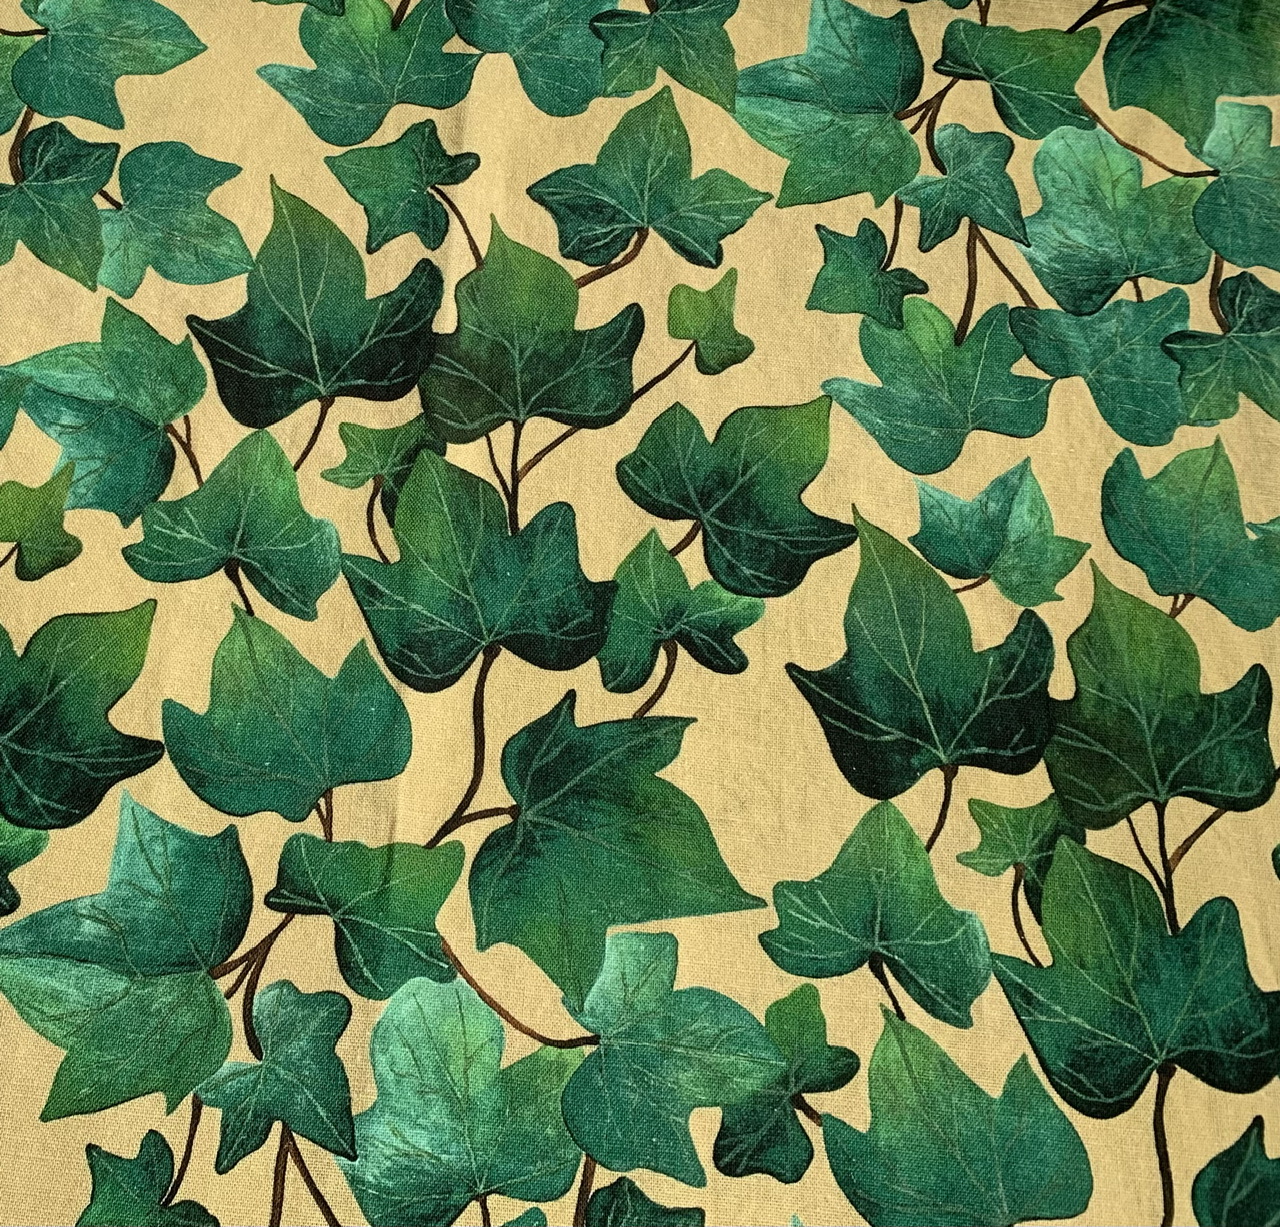 A repeat pattern design printed onto a cotton linen fabric, showing a light beige background with big ivy leaves vining up the fabric.